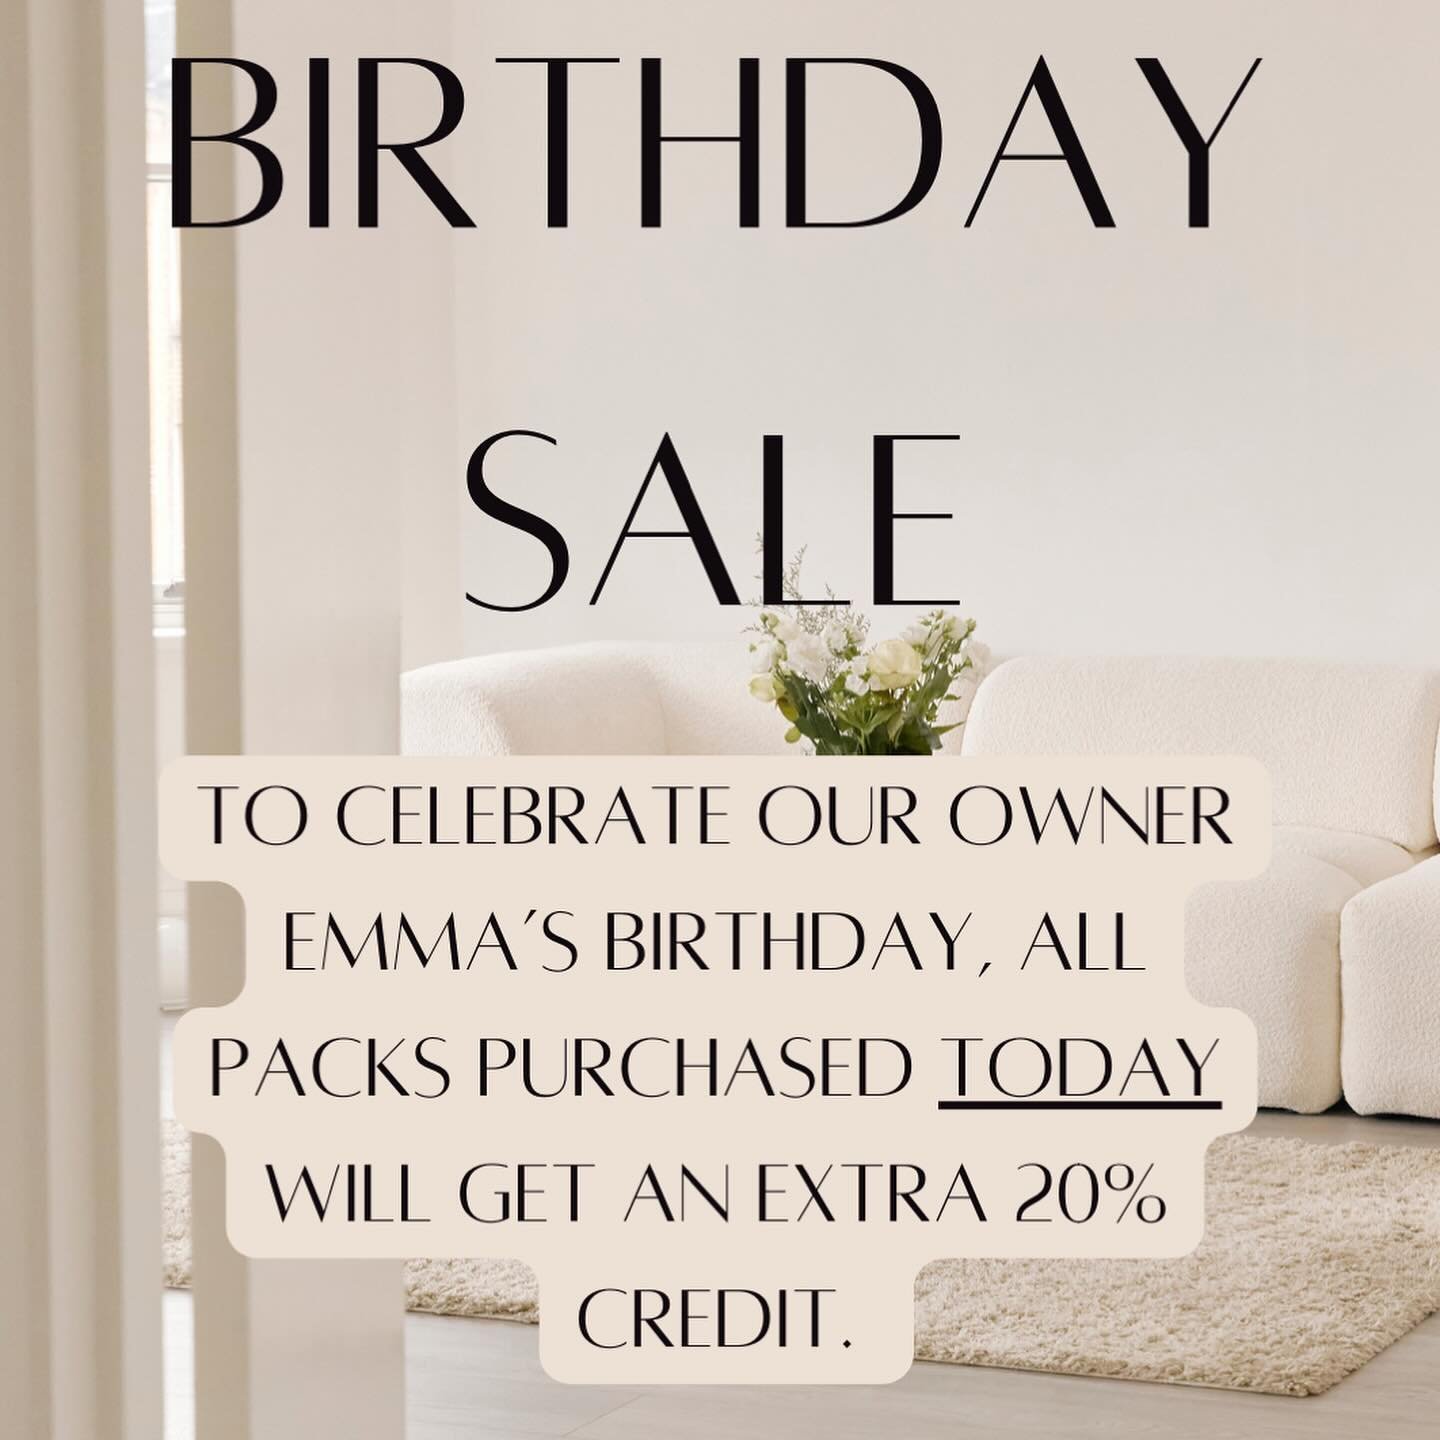 To celebrate @breathebyemma birthday, all packs purchased today will receive an extra 20% credit! Purchase via the link in our story or on our website www.breathestudiolondon.co.uk 🤍🎂